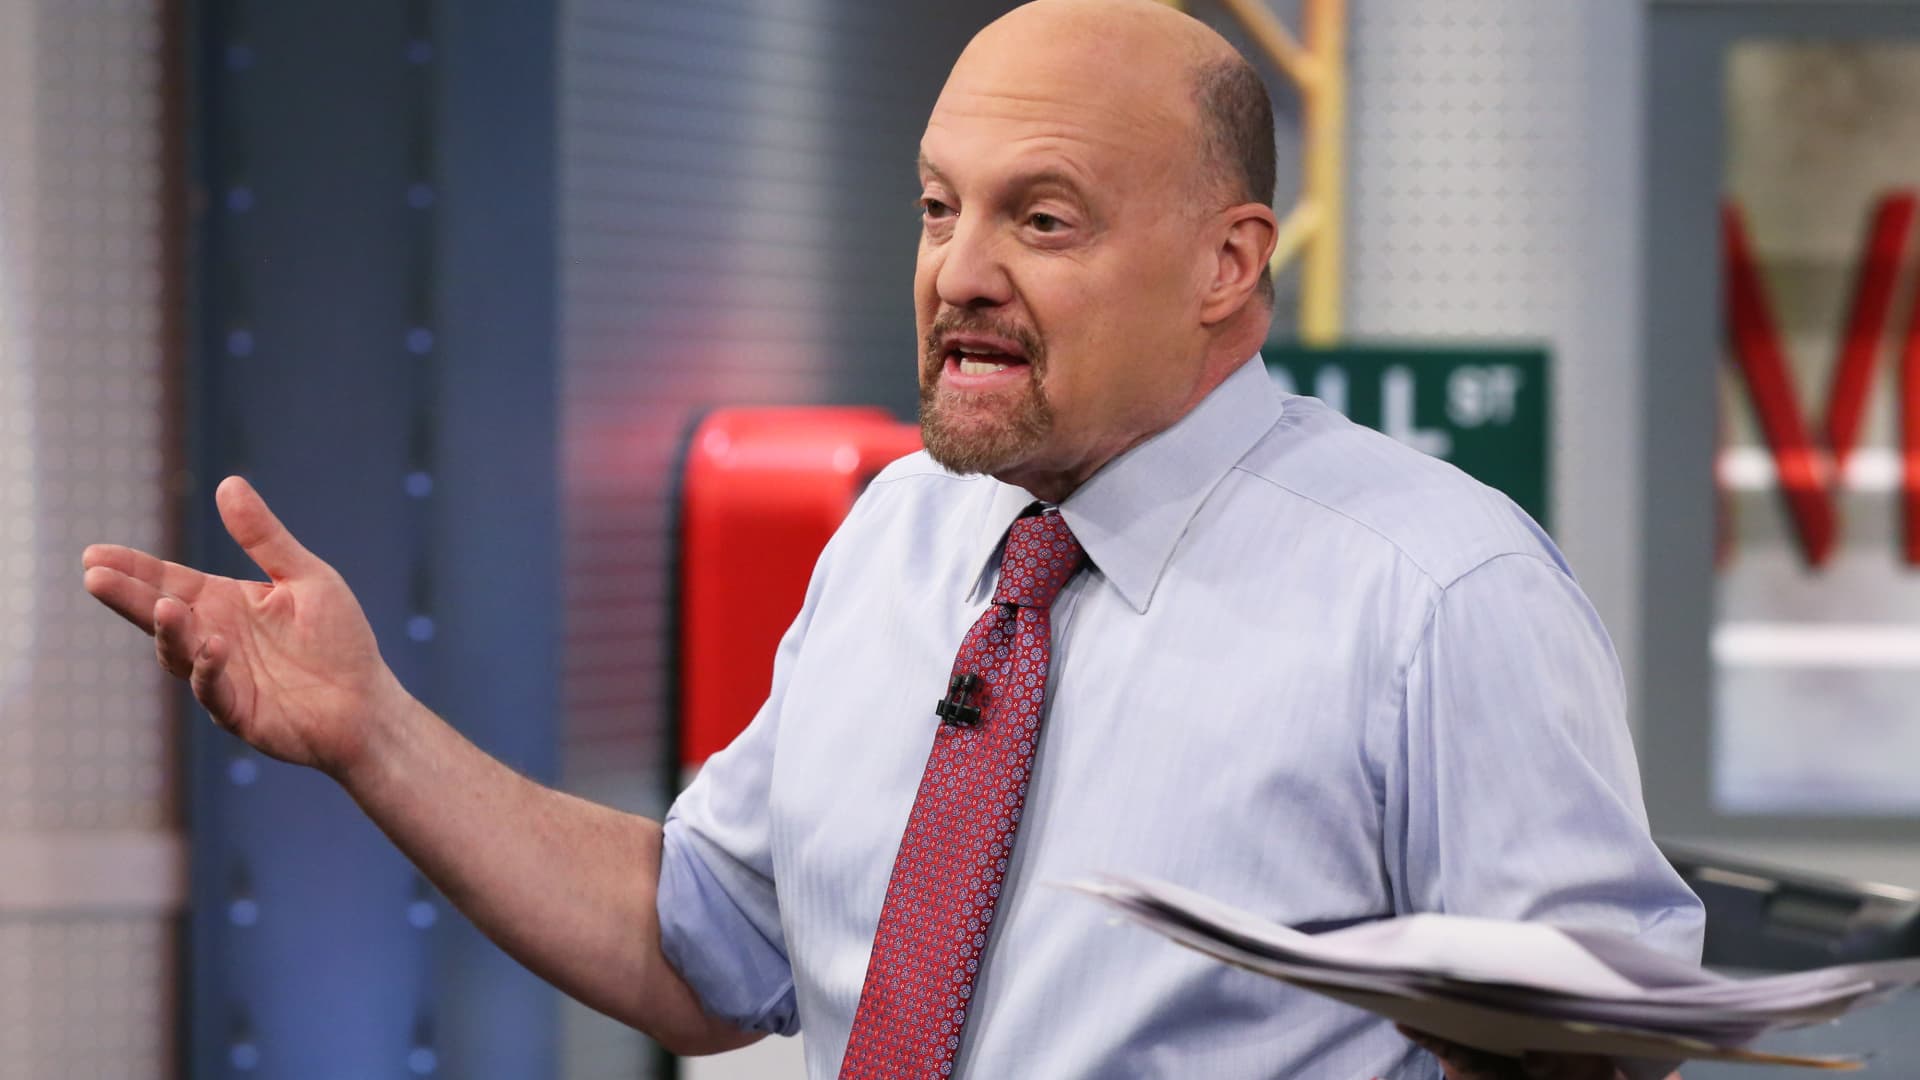 Jim Cramer says these 7 winning stocks from the Covid era have staying power